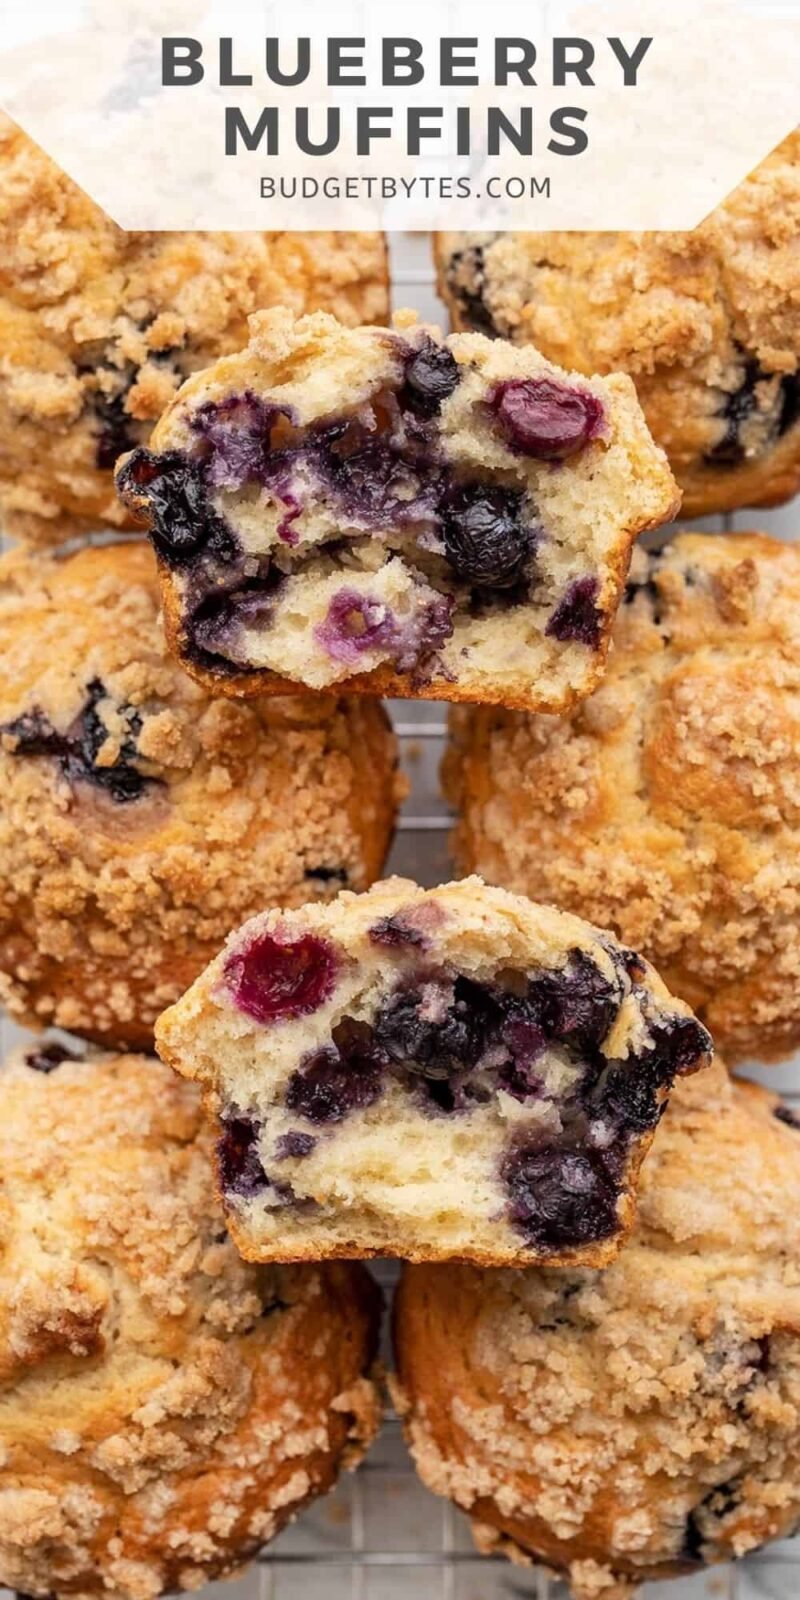 Overhead view of baked blueberry muffins with one torn open.